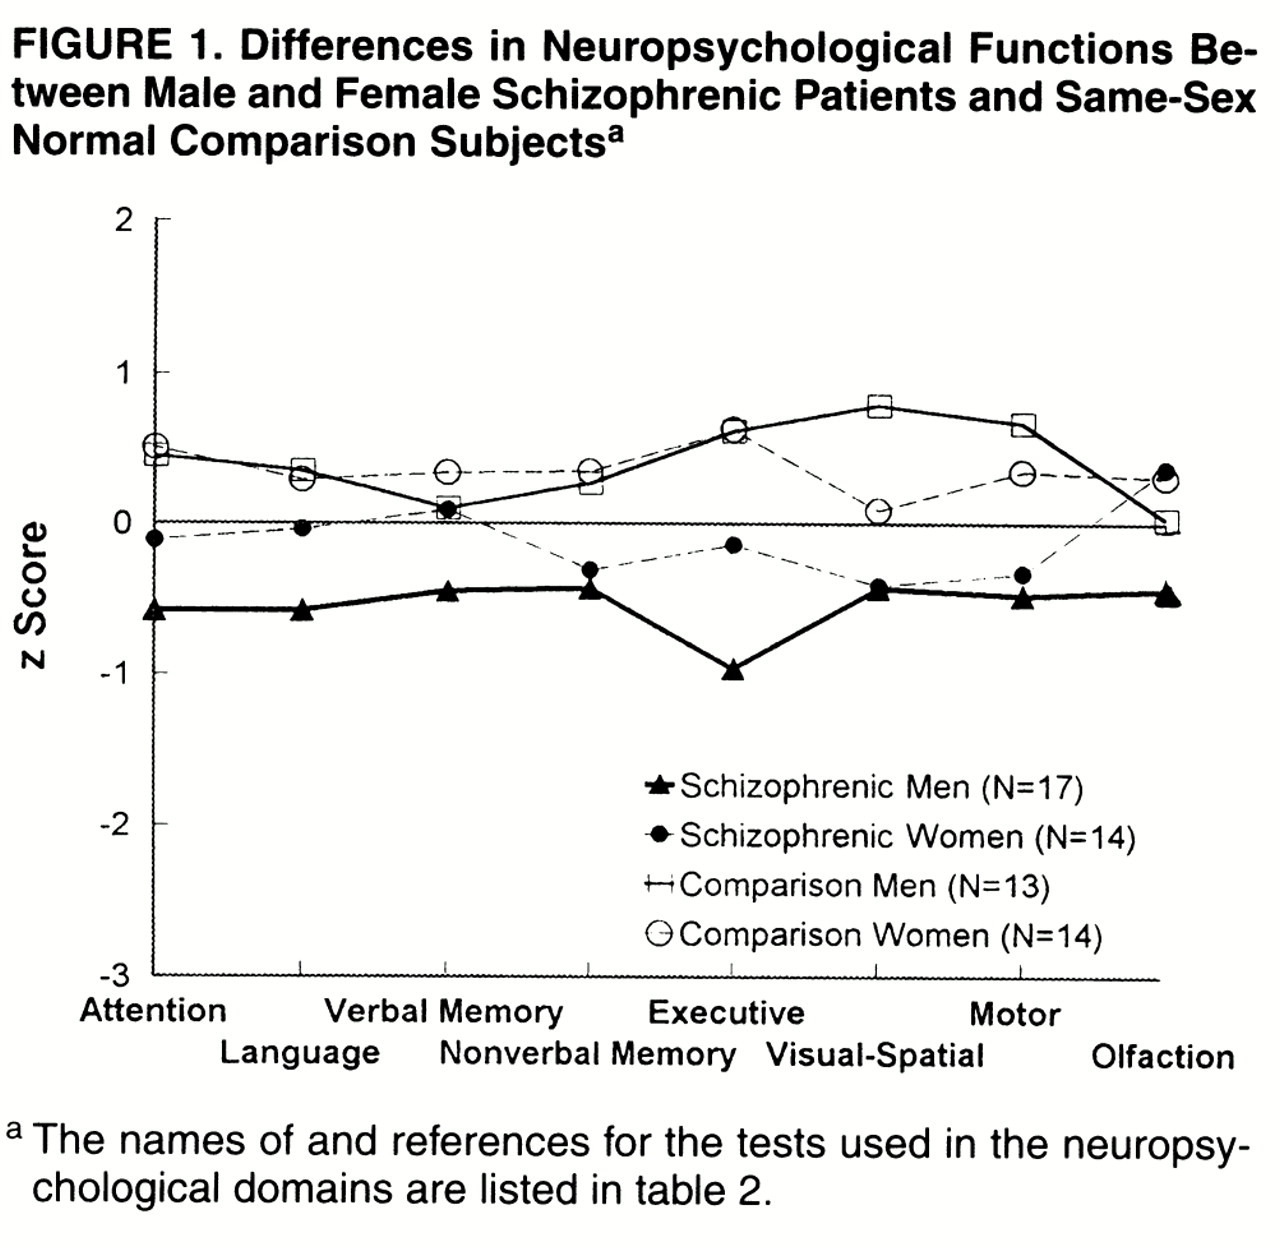 Are There Sex Differences In Neuropsychological Functions Among Patients With Schizophrenia